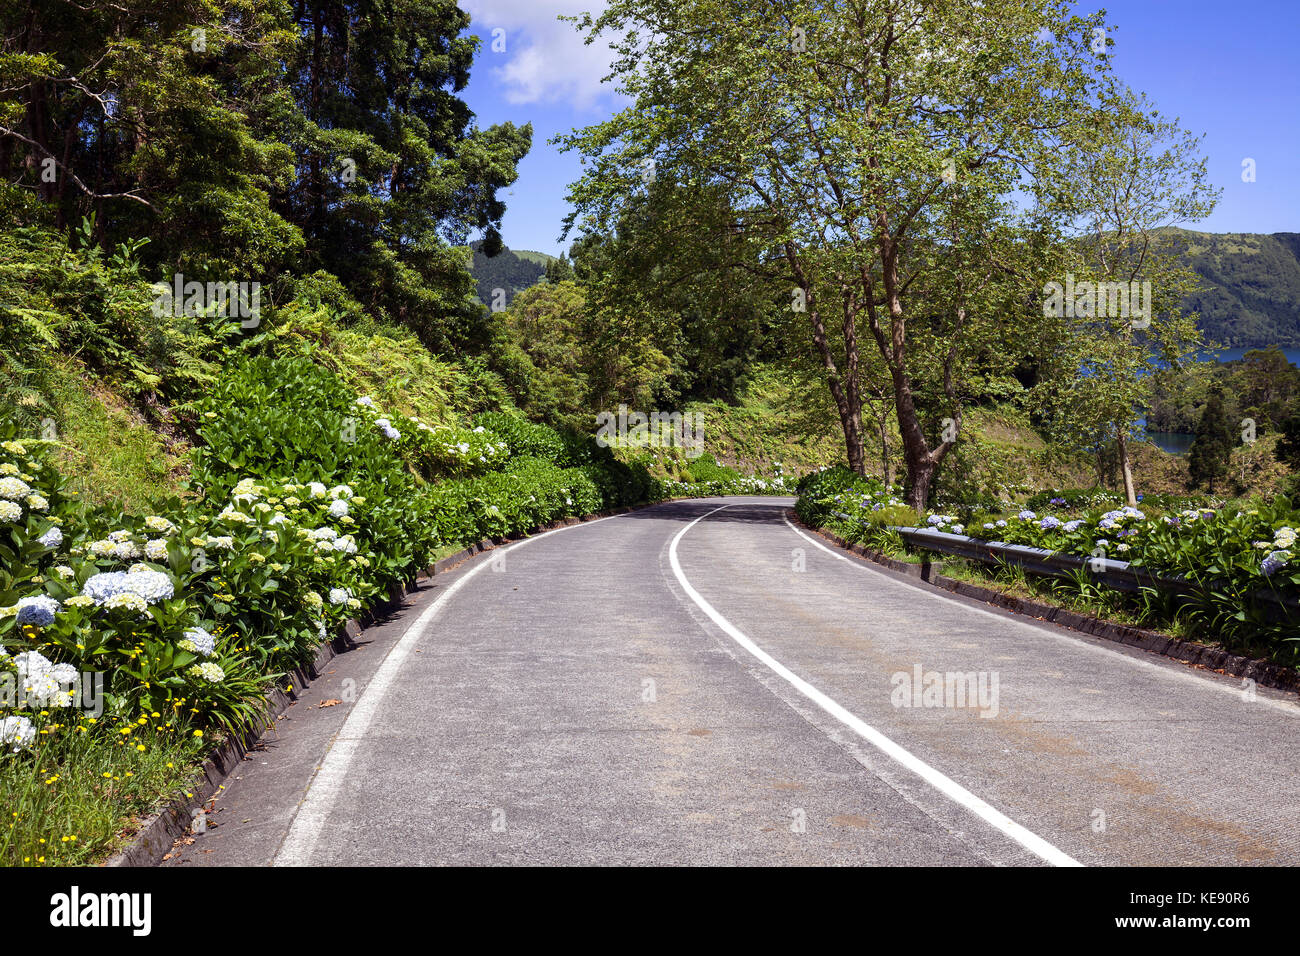 Street in the volcanic crater Sete Cidades, at the roadside Hortensias (Hydrangea), São Miguel, Azores, Portugal Stock Photo